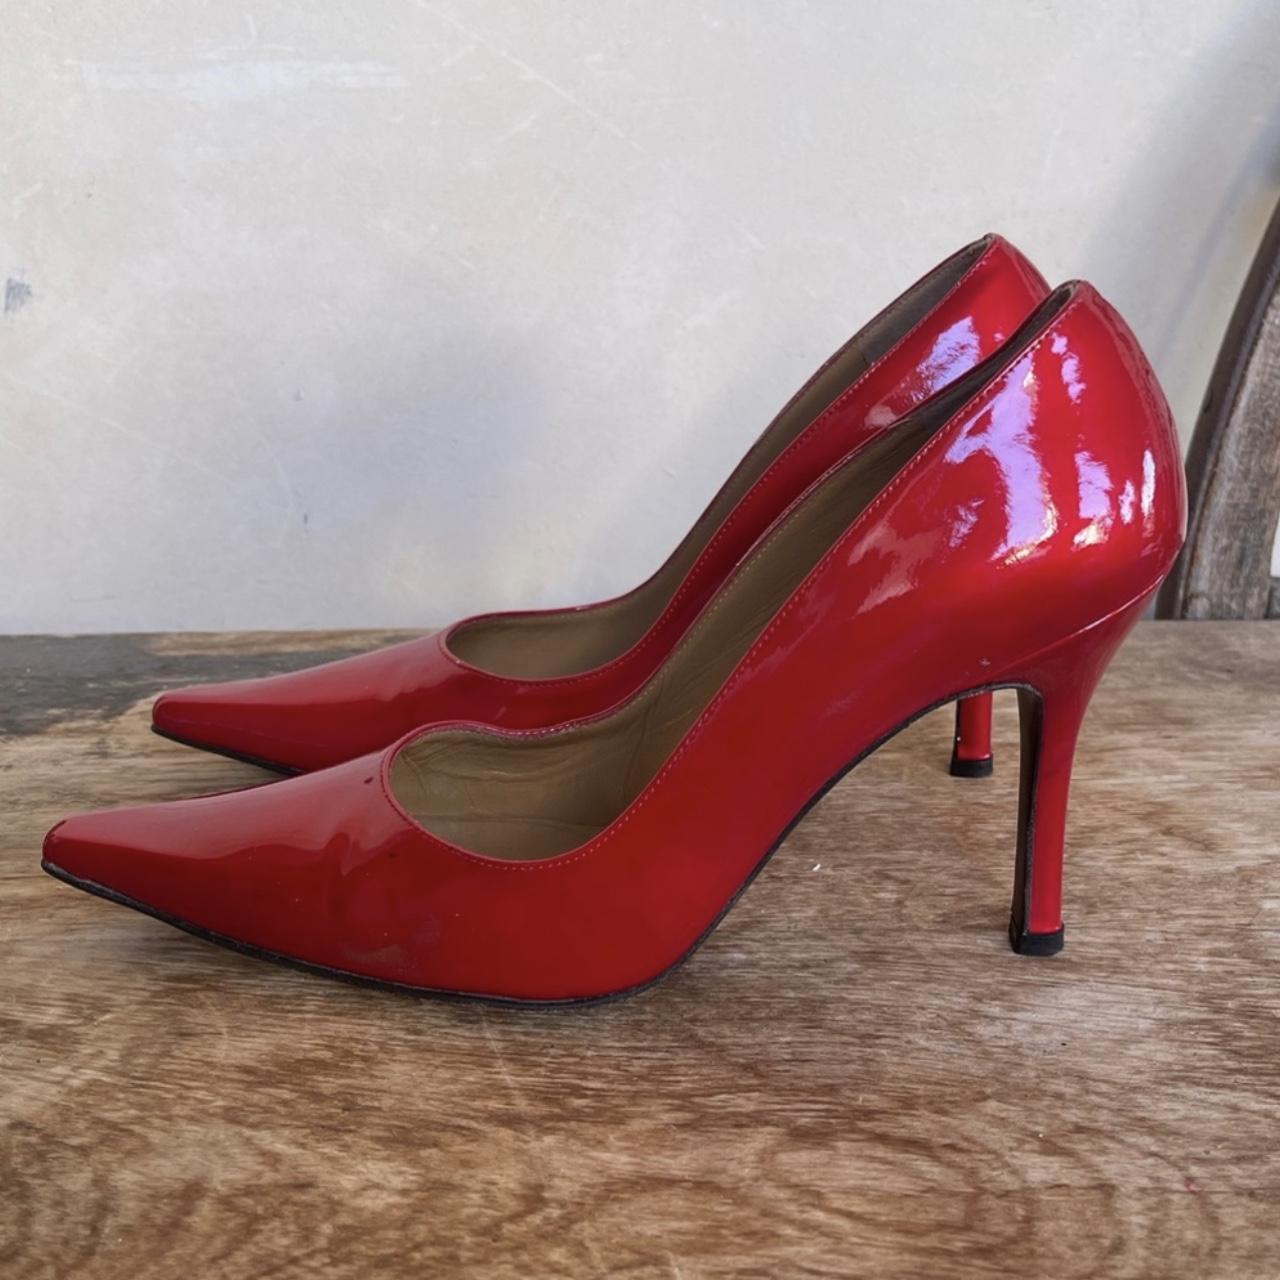 STUART WEITZMAN Sexy Candy Apple Red Patent Leather... - Depop